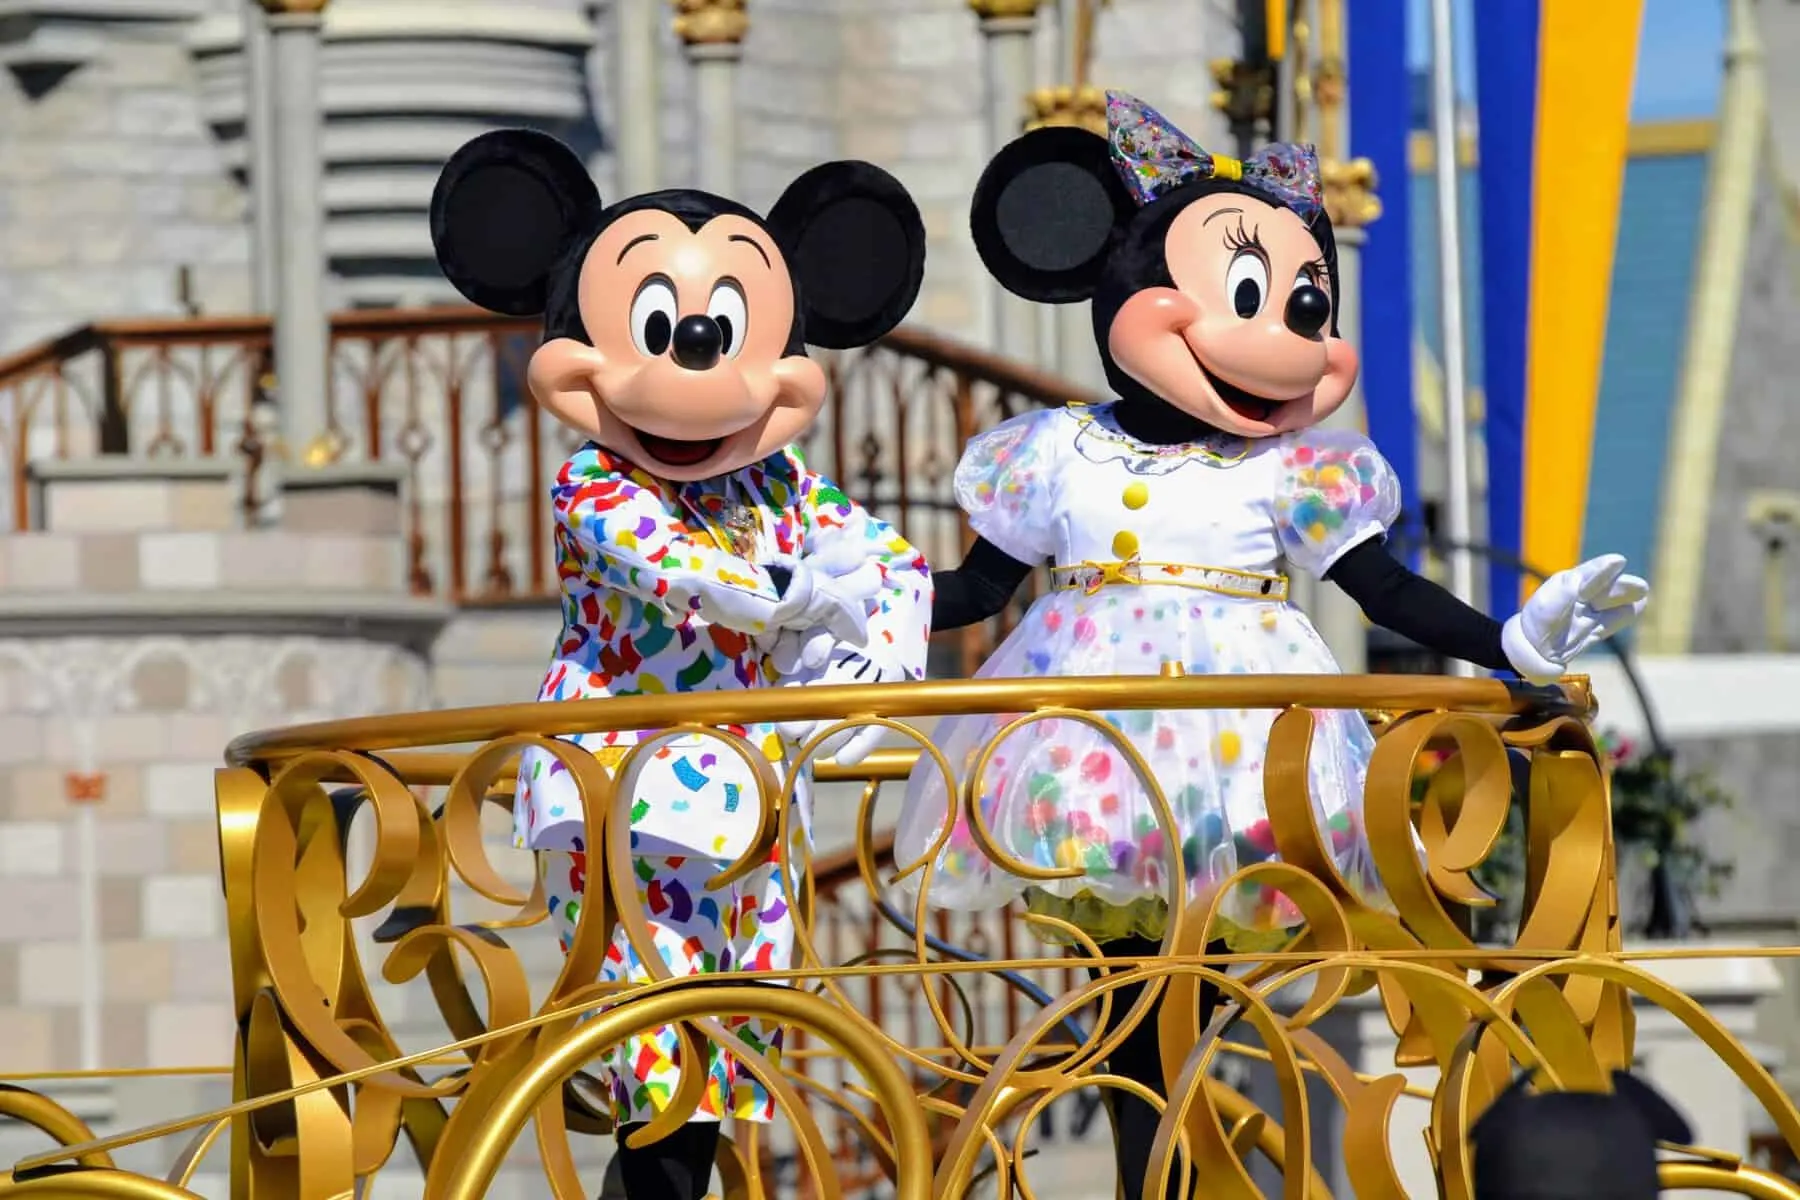 Mickey and Minnie in Move it, Shake it